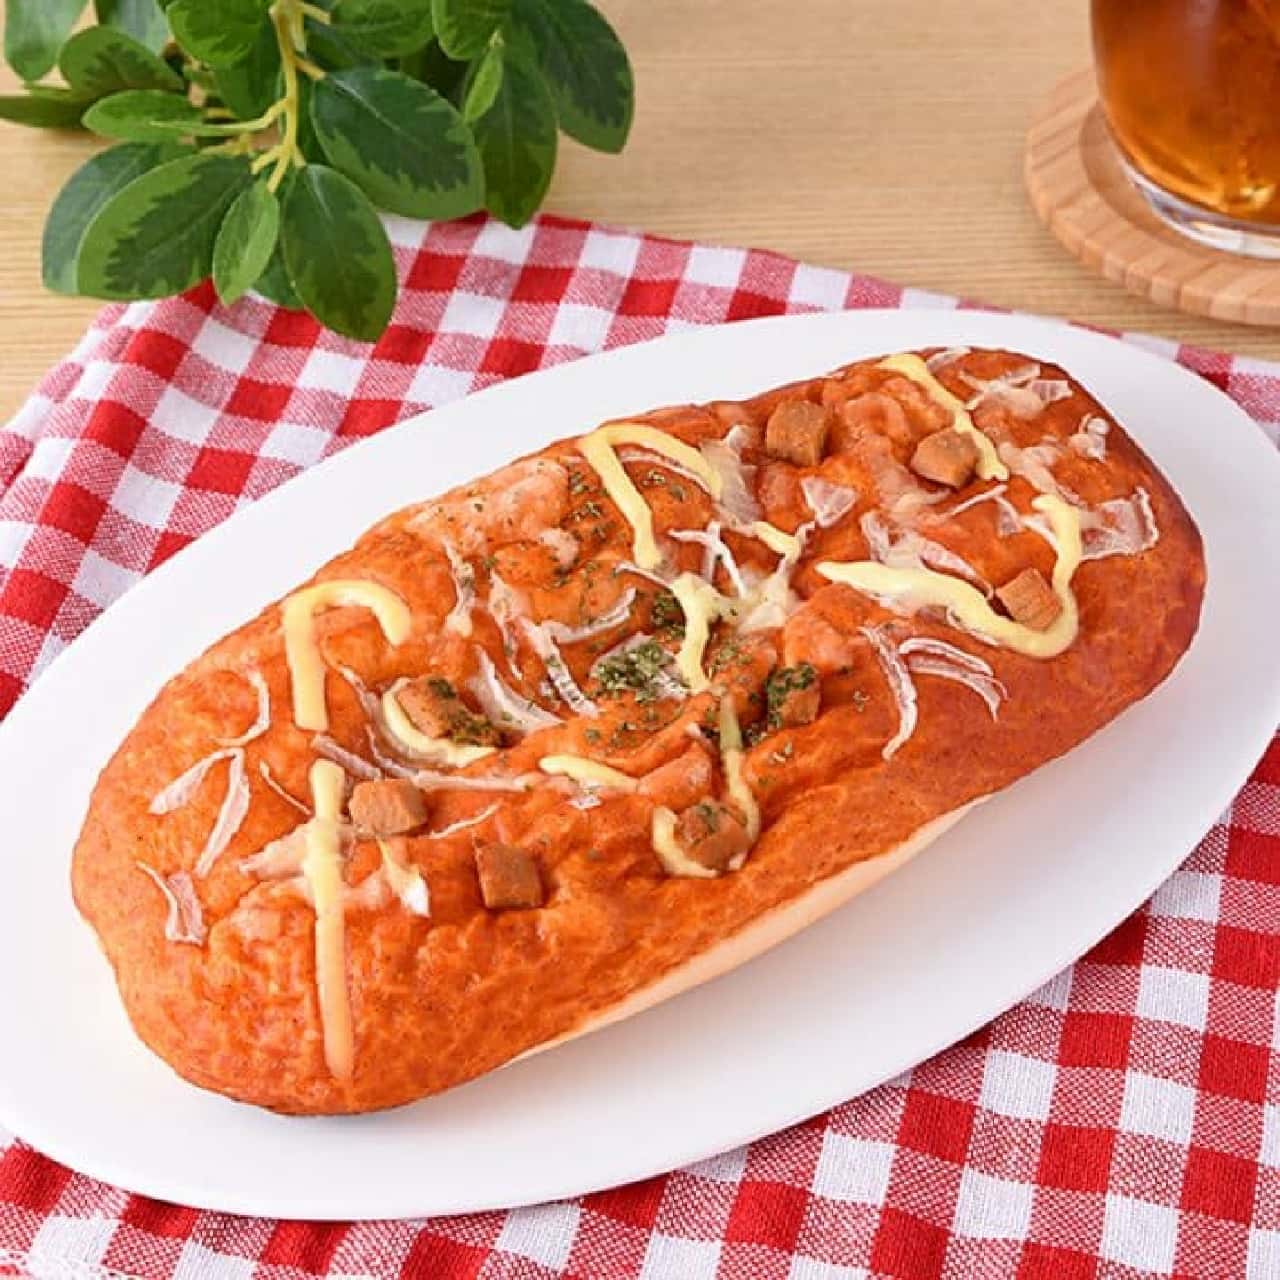 FamilyMart "Spicy Pizza Bread with Ripe Tomatoes